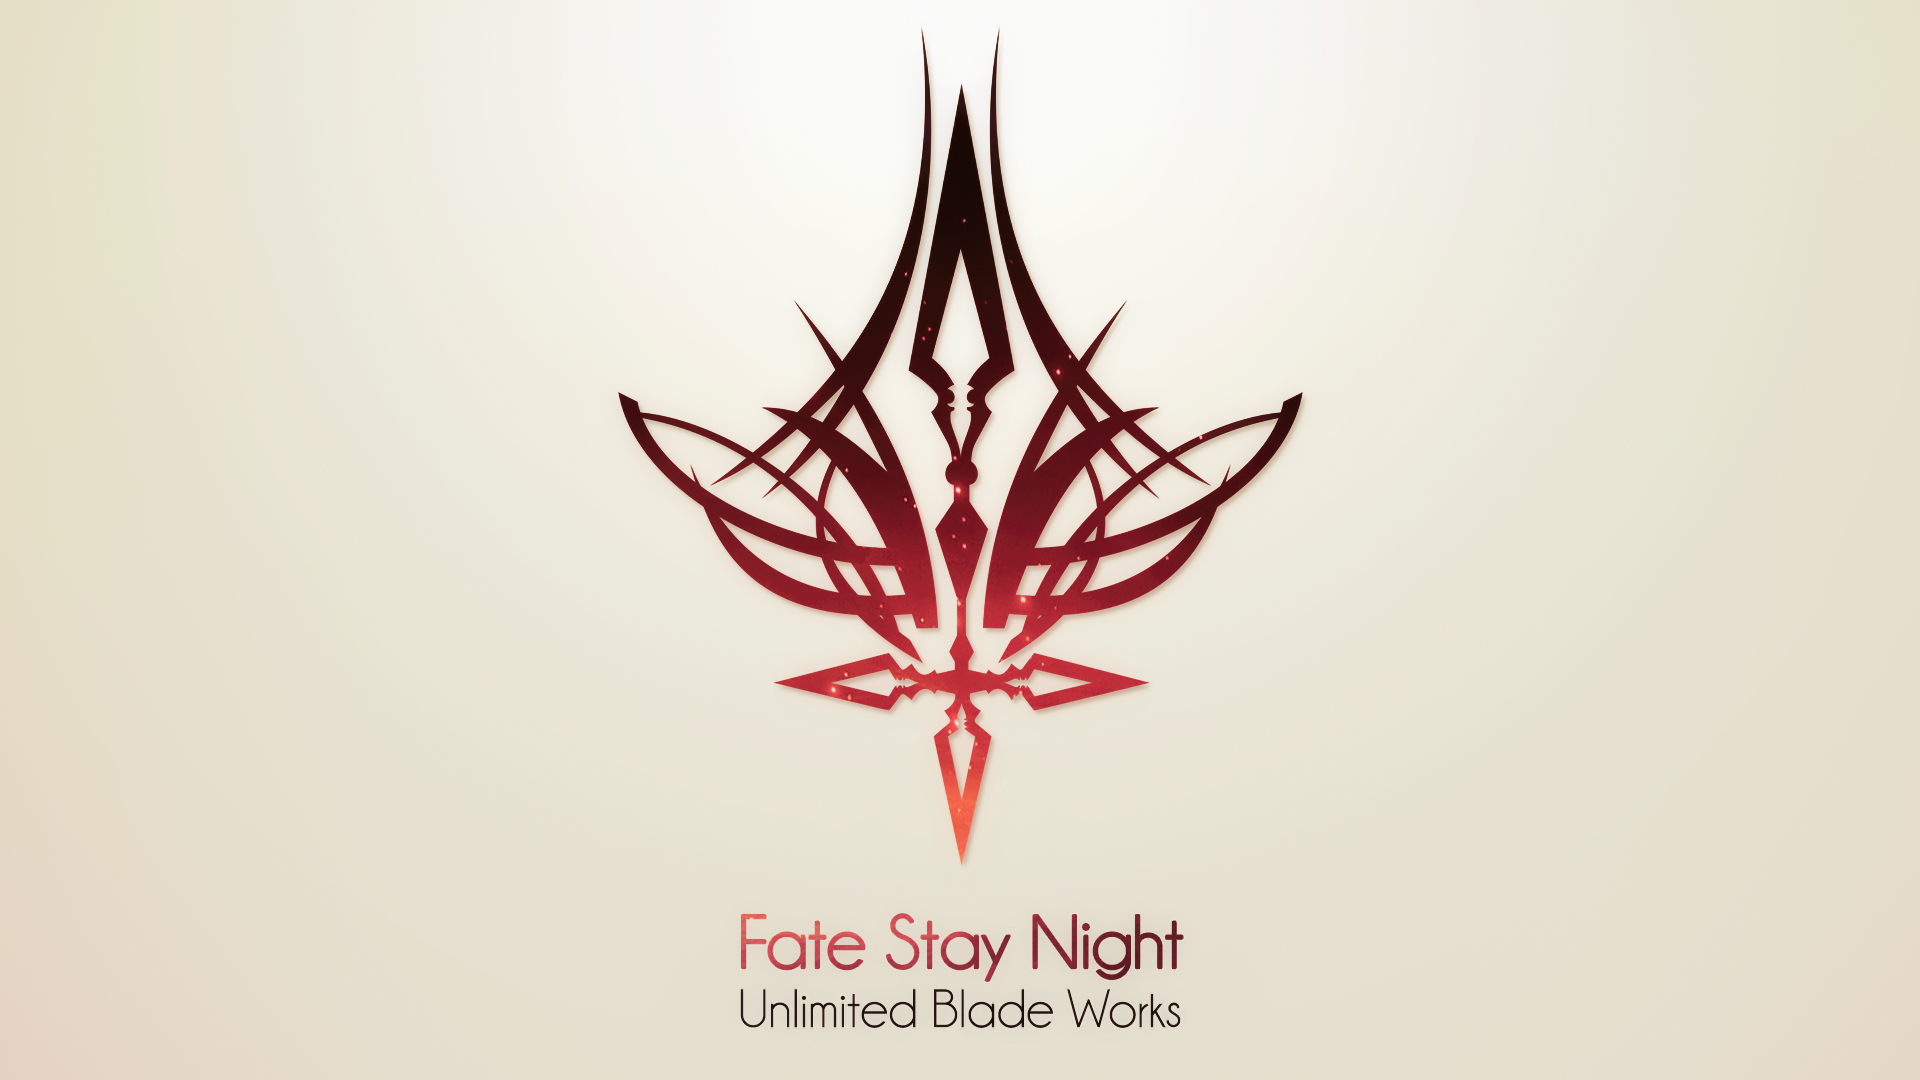 Anime 1920x1080 artwork Fate series Fate/Stay Night Fate/Stay Night: Unlimited Blade Works logo anime simple background white background typography